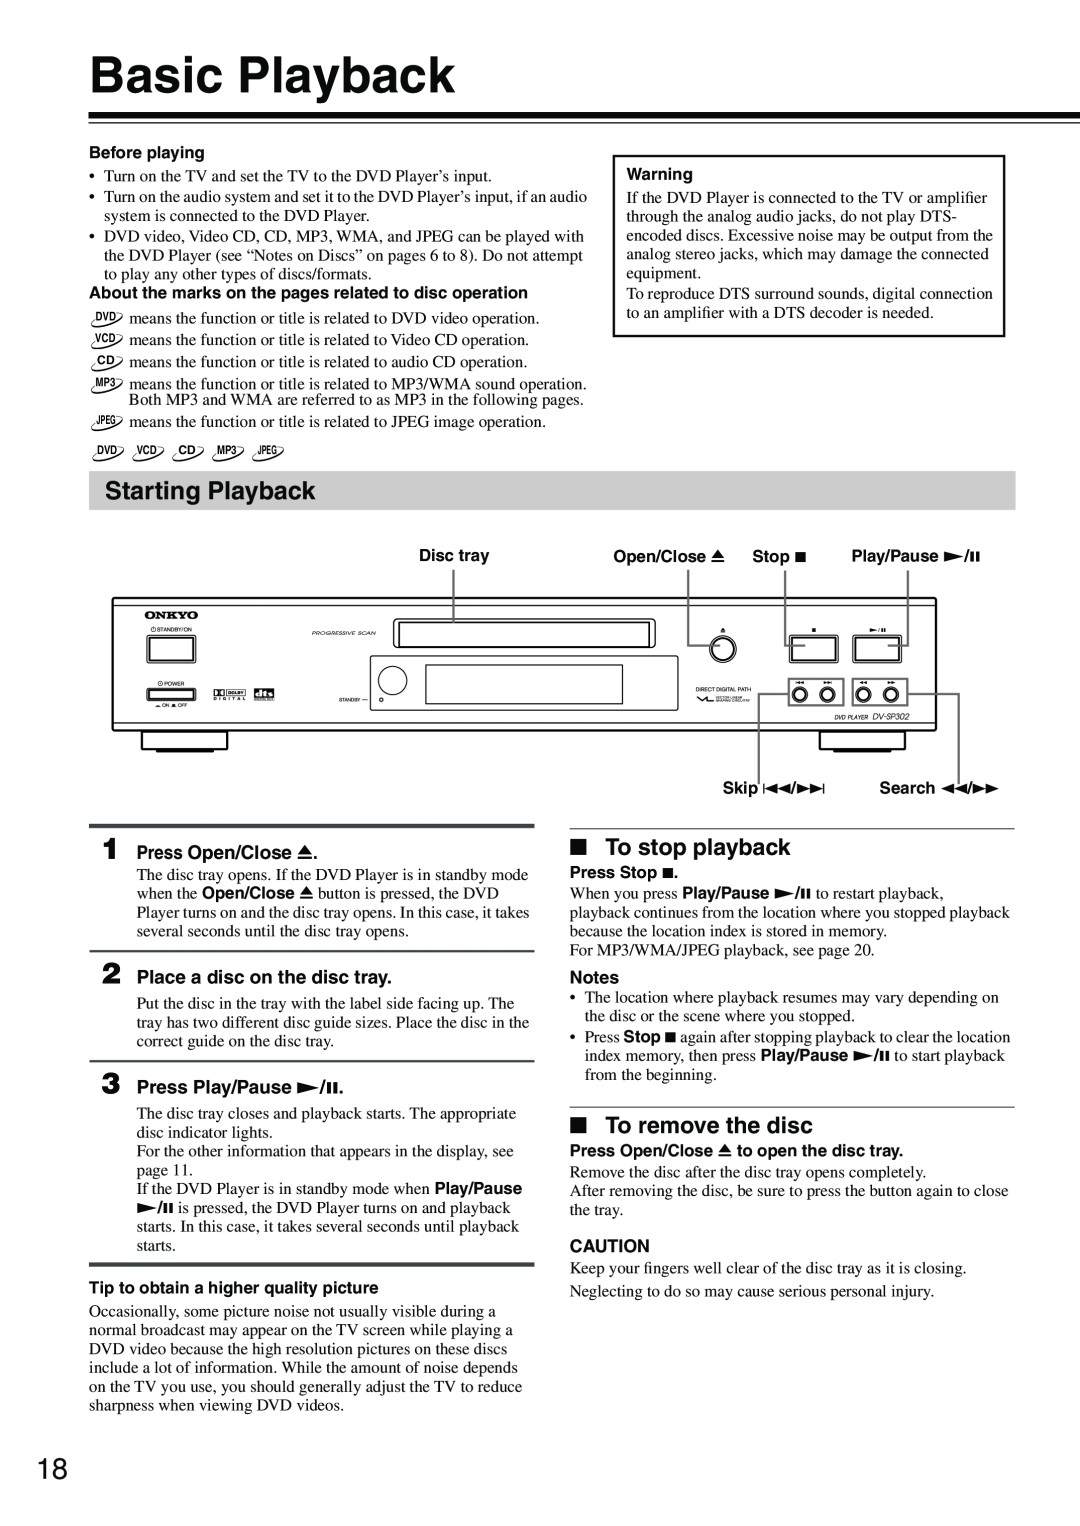 Onkyo DV-SP302 instruction manual Basic Playback, Starting Playback, To stop playback, To remove the disc, Press Open/Close 